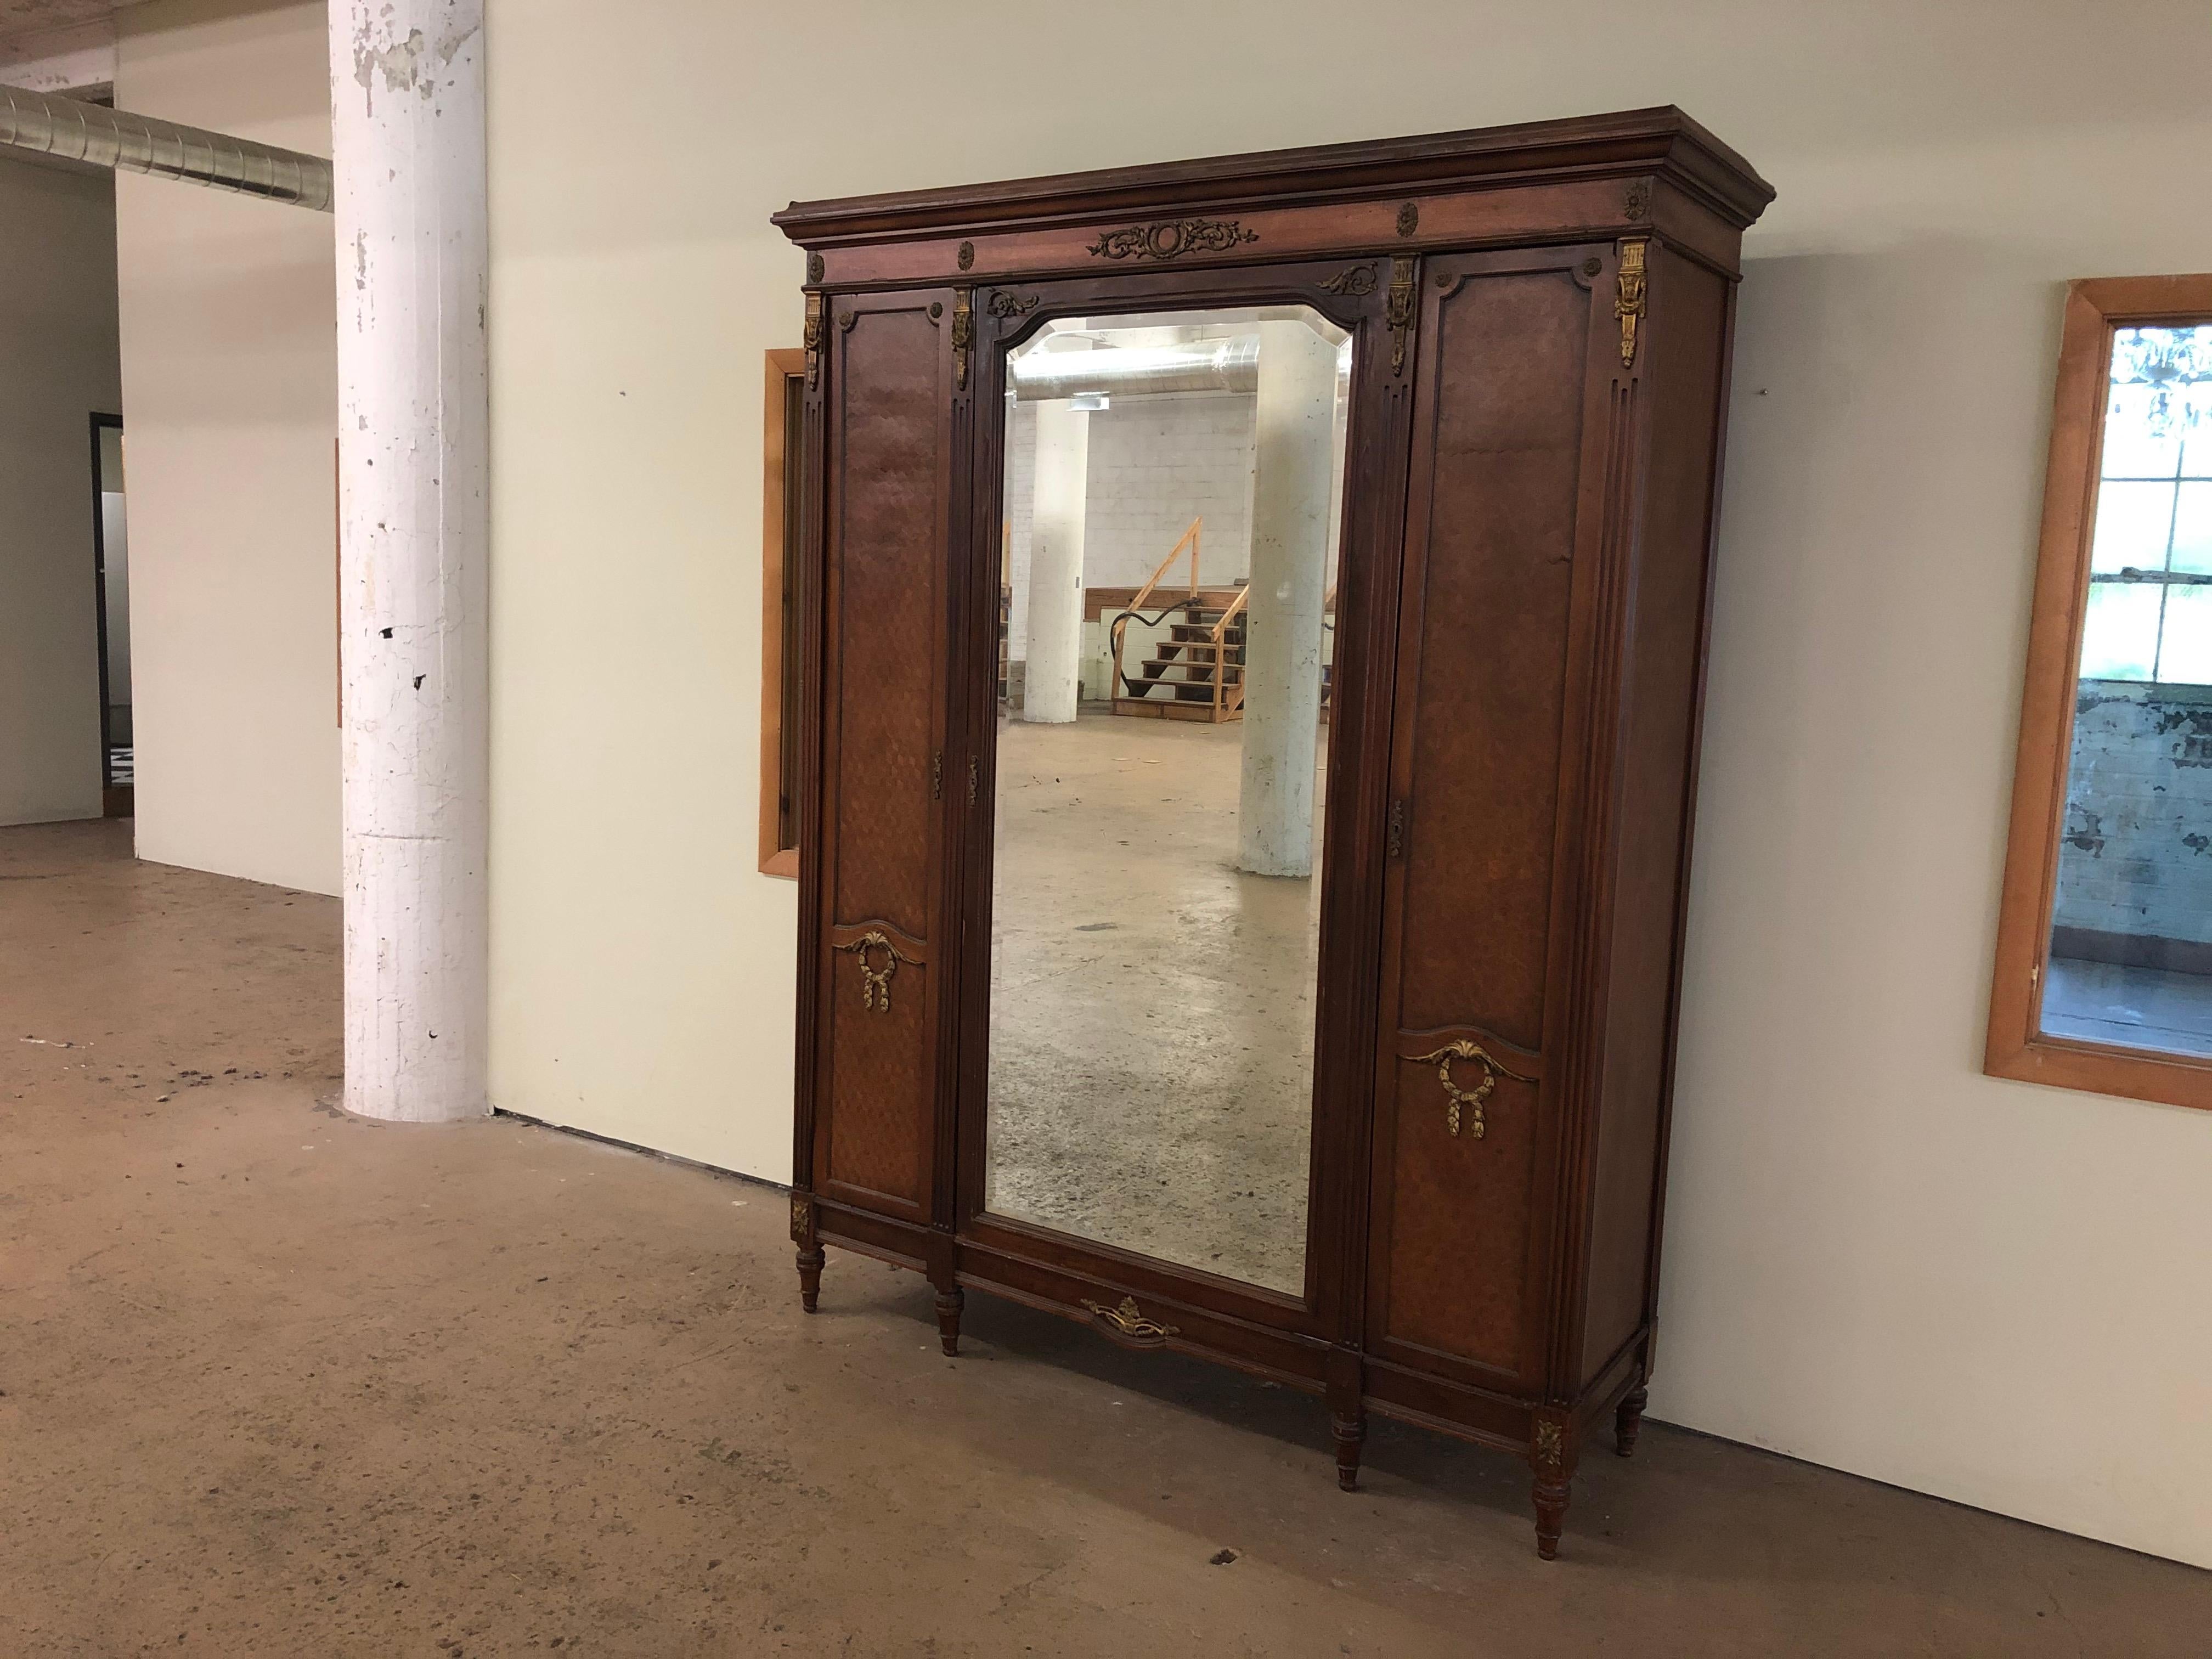 A stunning French Louis XVI knockdown armoire dresser or wardrobe

France, circa 1900

Mahogany and satinwood, with inlaid parquetry and mounted bronze ormolu. Beveled mirror on center door and mirrored interiors on side doors. Interior shelving